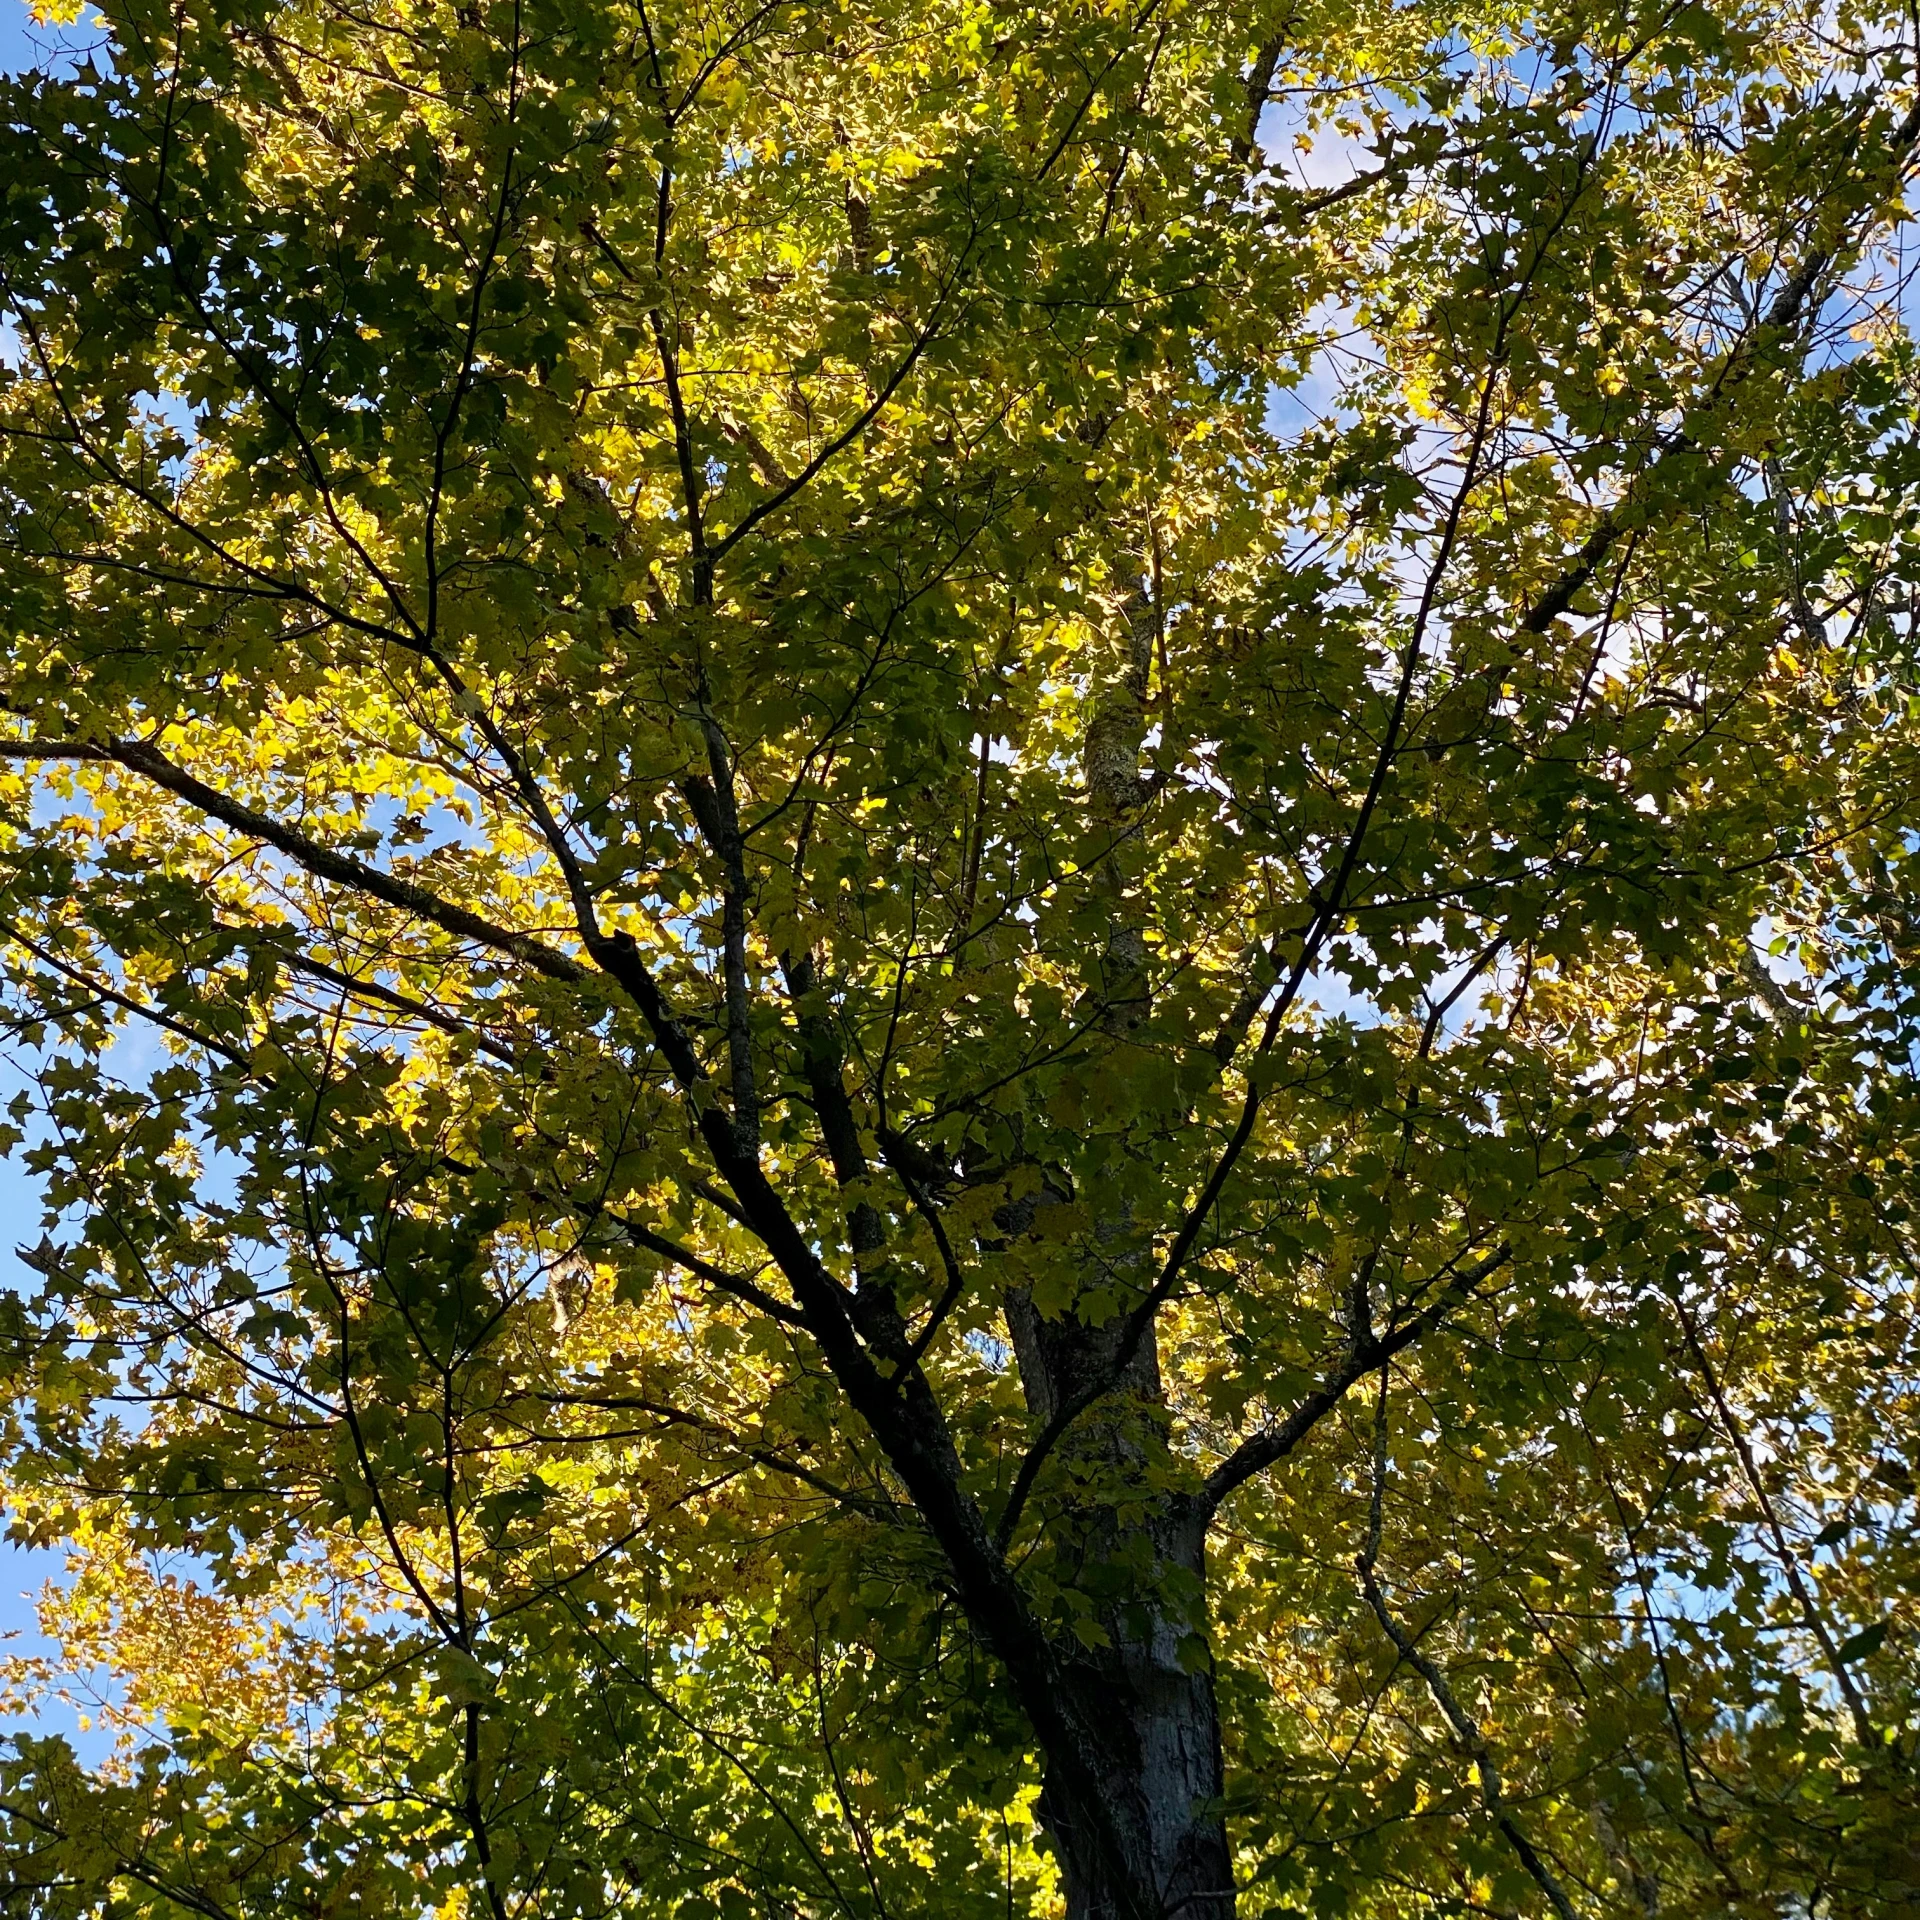 the view of a tree from below with the sky in the background